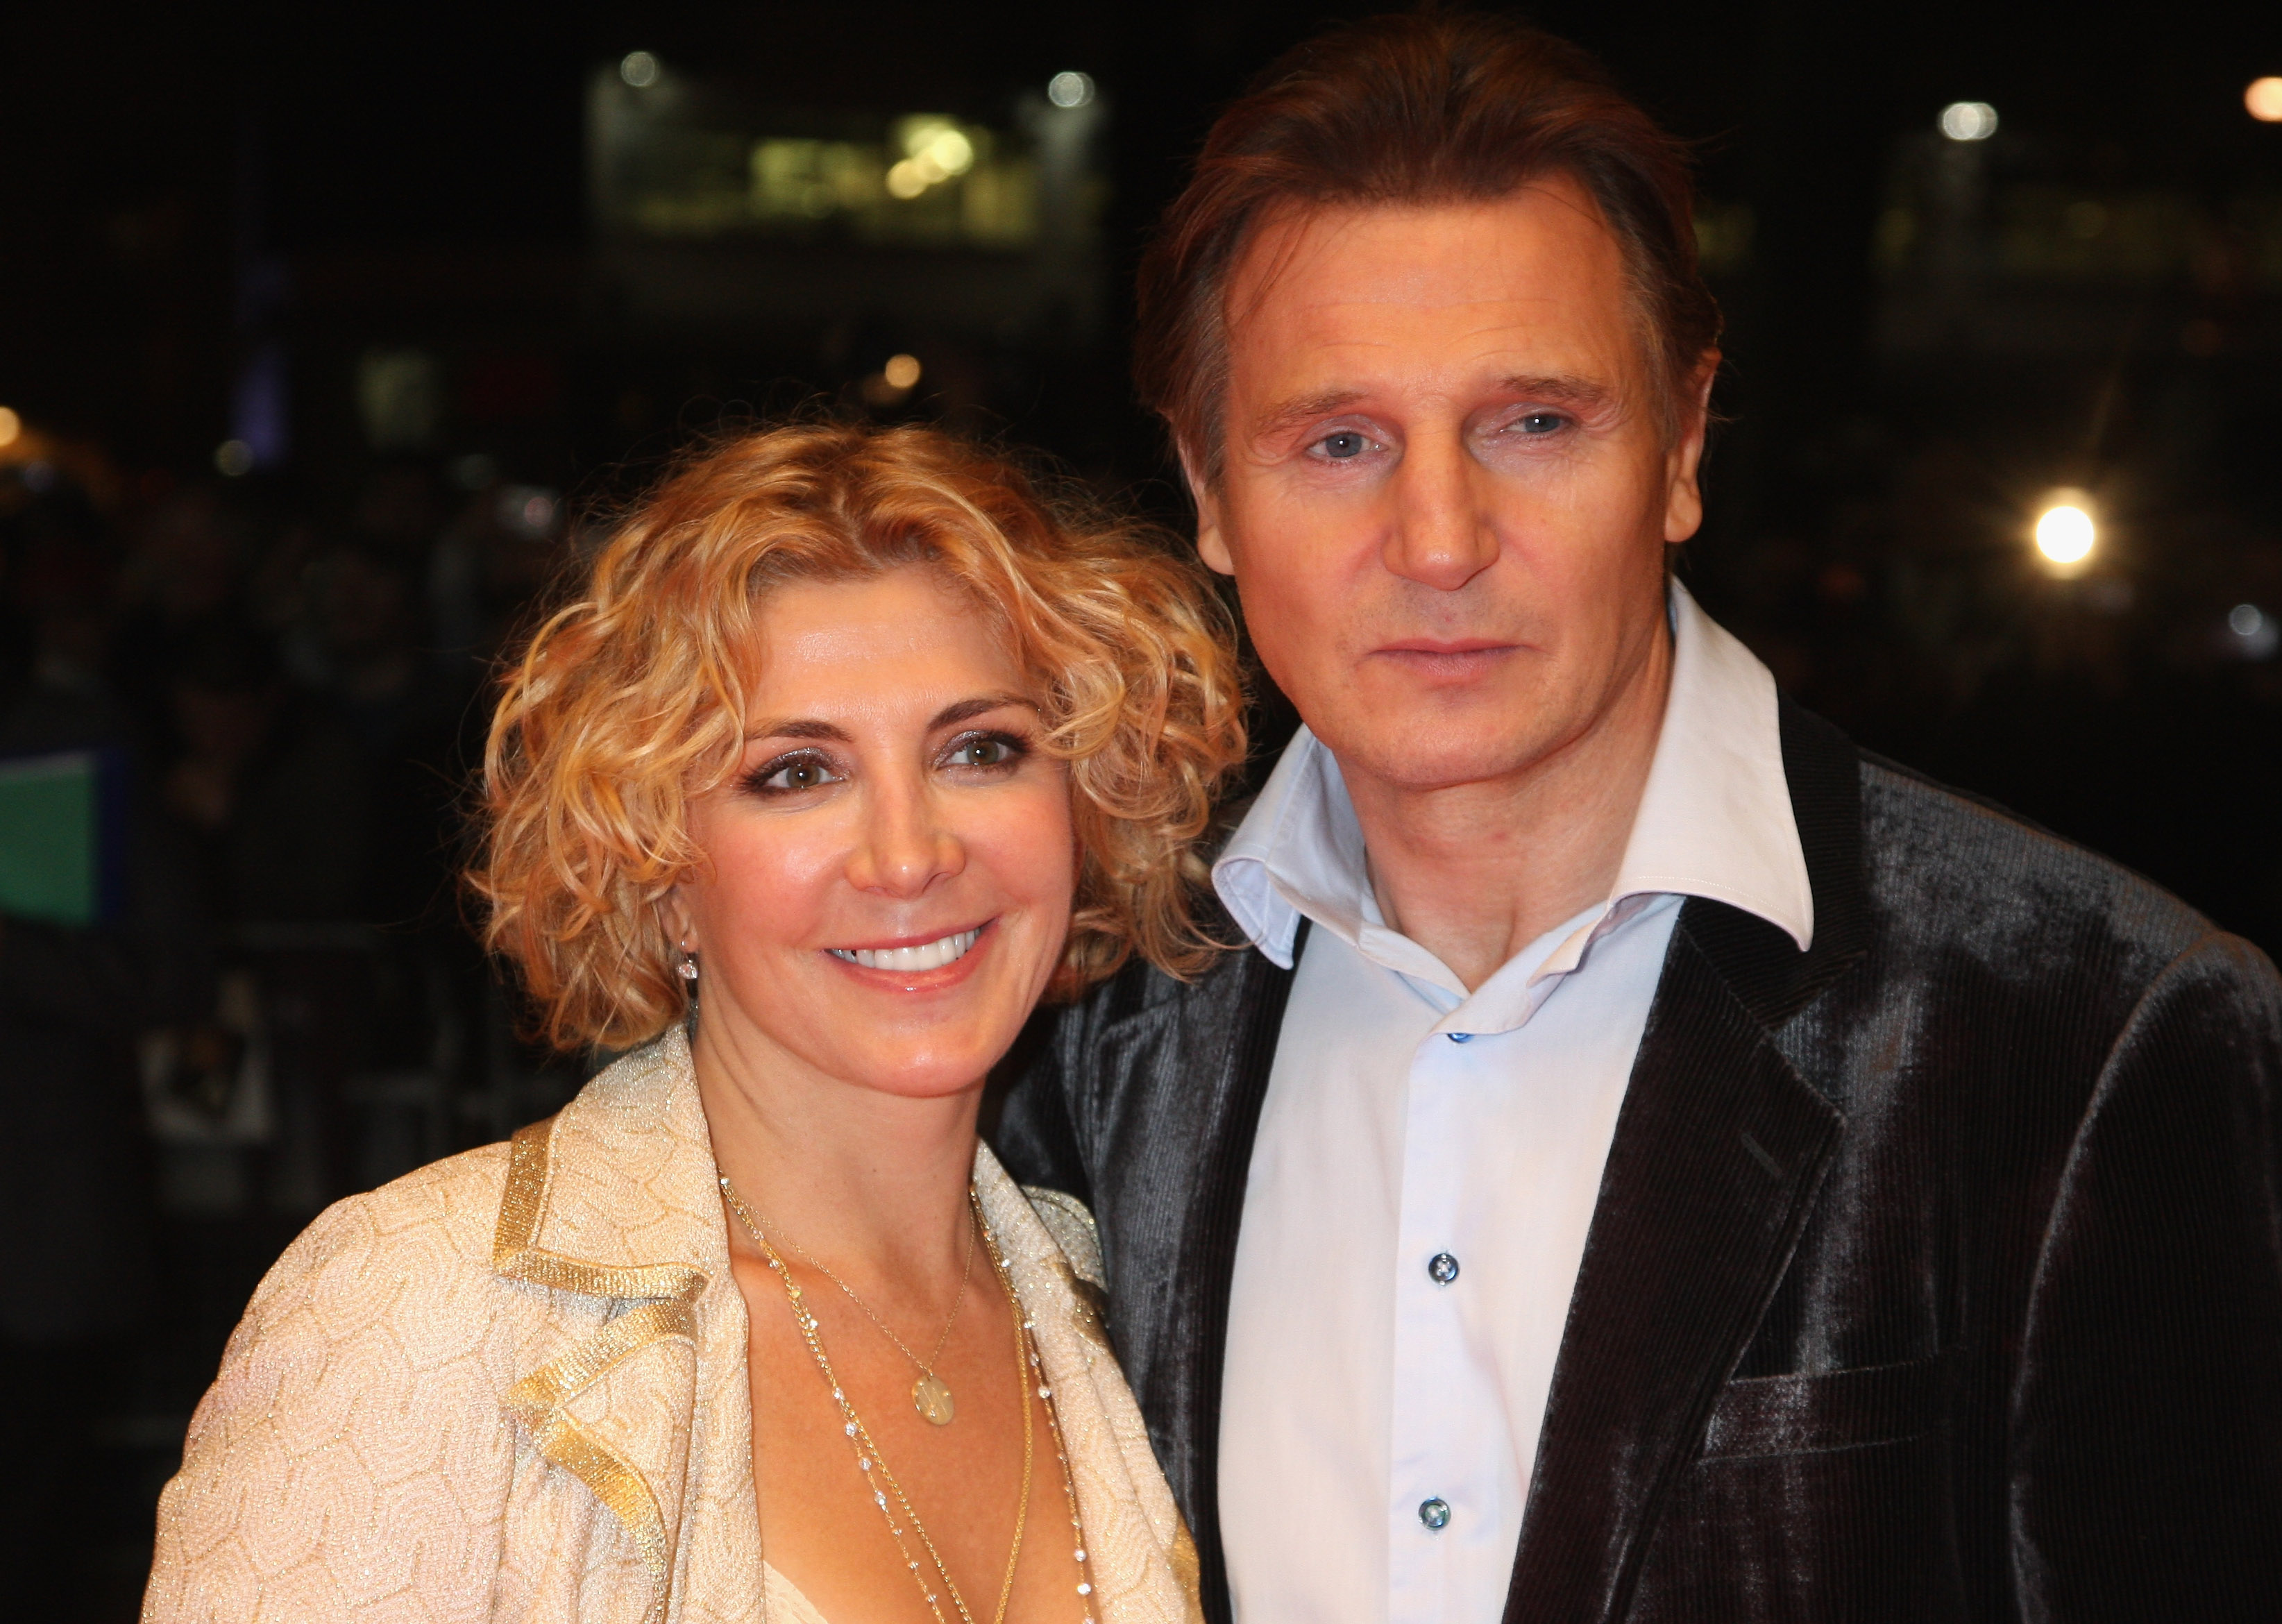 Liam Neeson and Natasha Richardson at the BFI 52 London Film Festival: "The Other Man" Premiere in London on Oct. 17, 2008. (Chris Jackson—Getty Images)